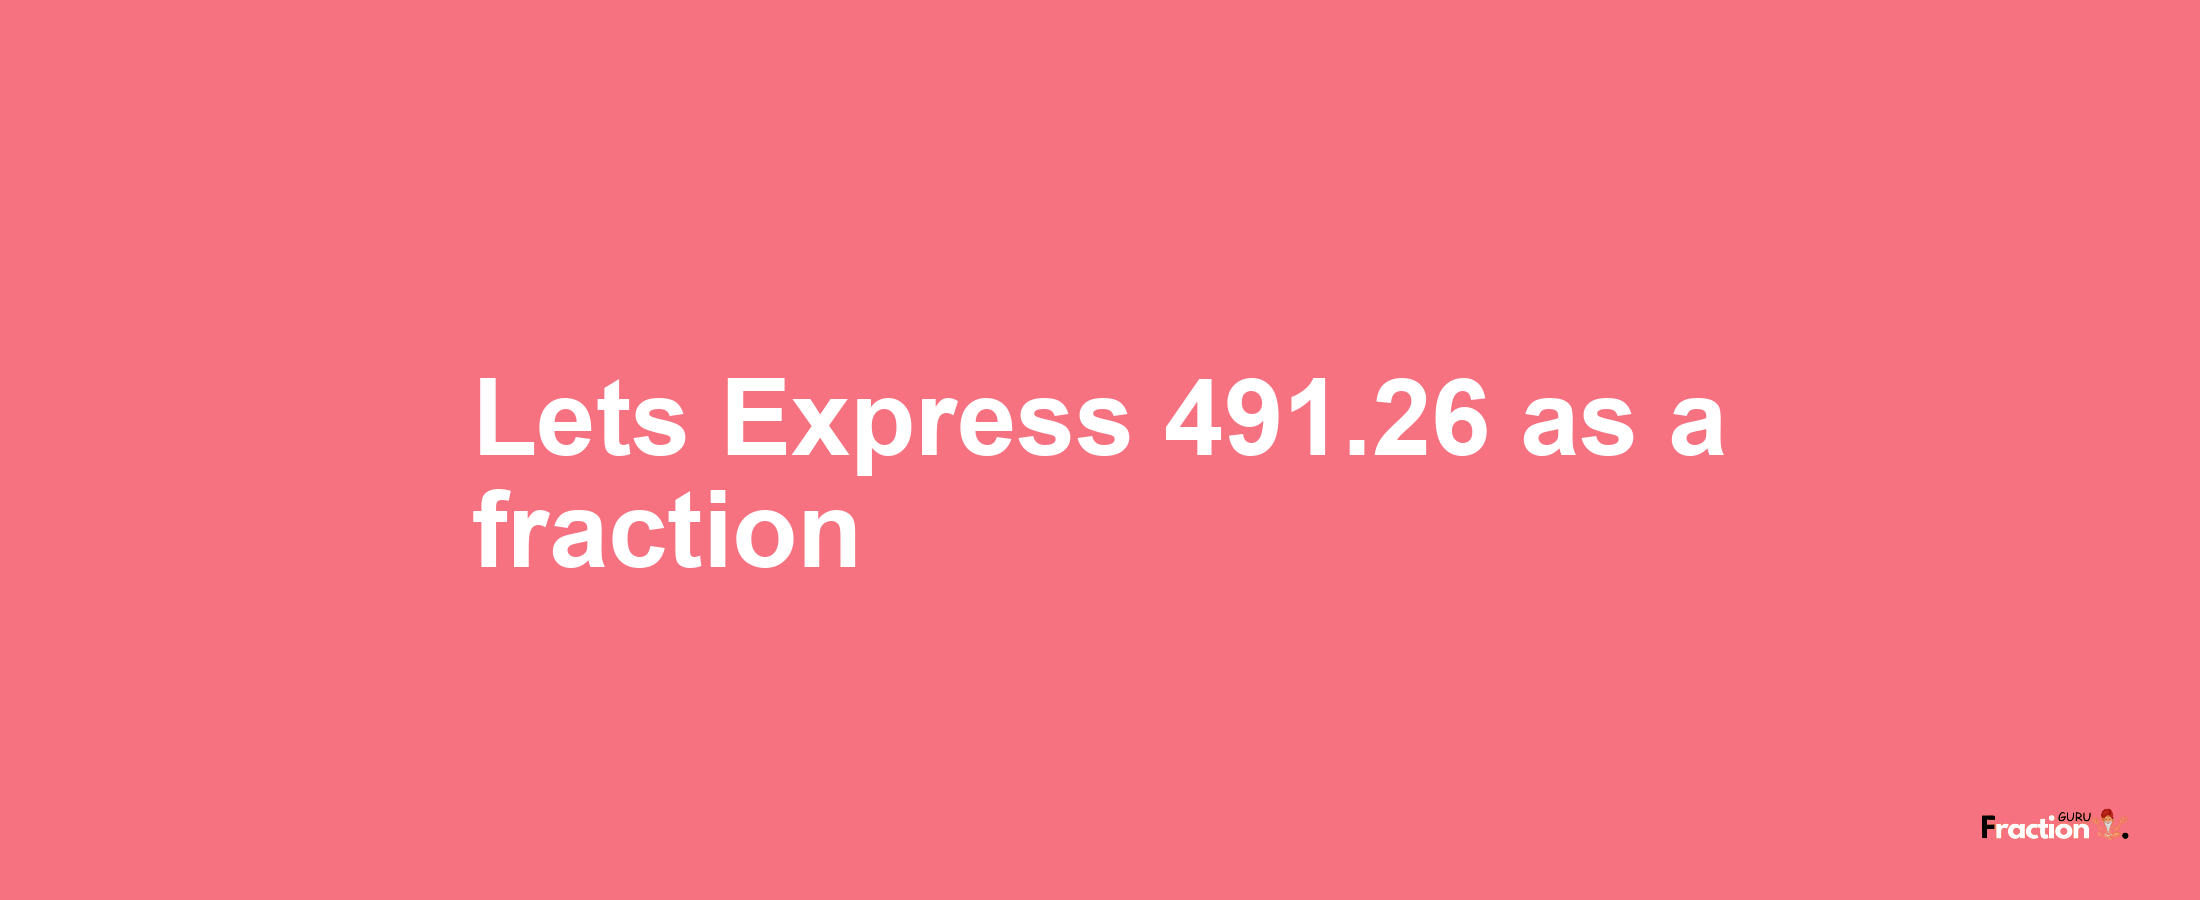 Lets Express 491.26 as afraction